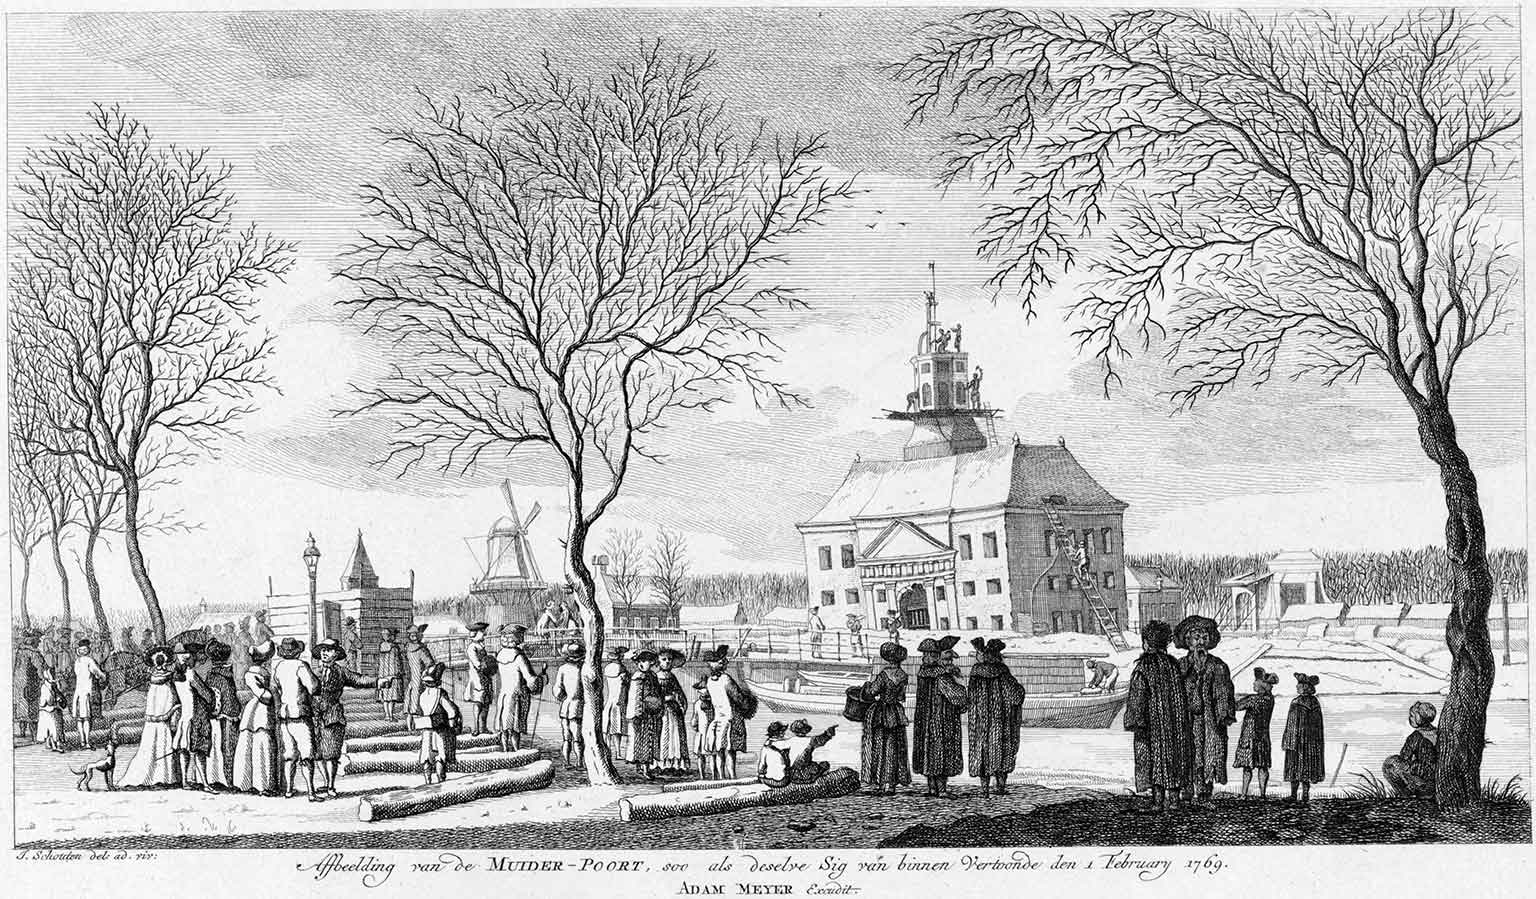 Demolition of the Muiderpoort gate, Amsterdam, in 1769, drawing by Jan Schouten